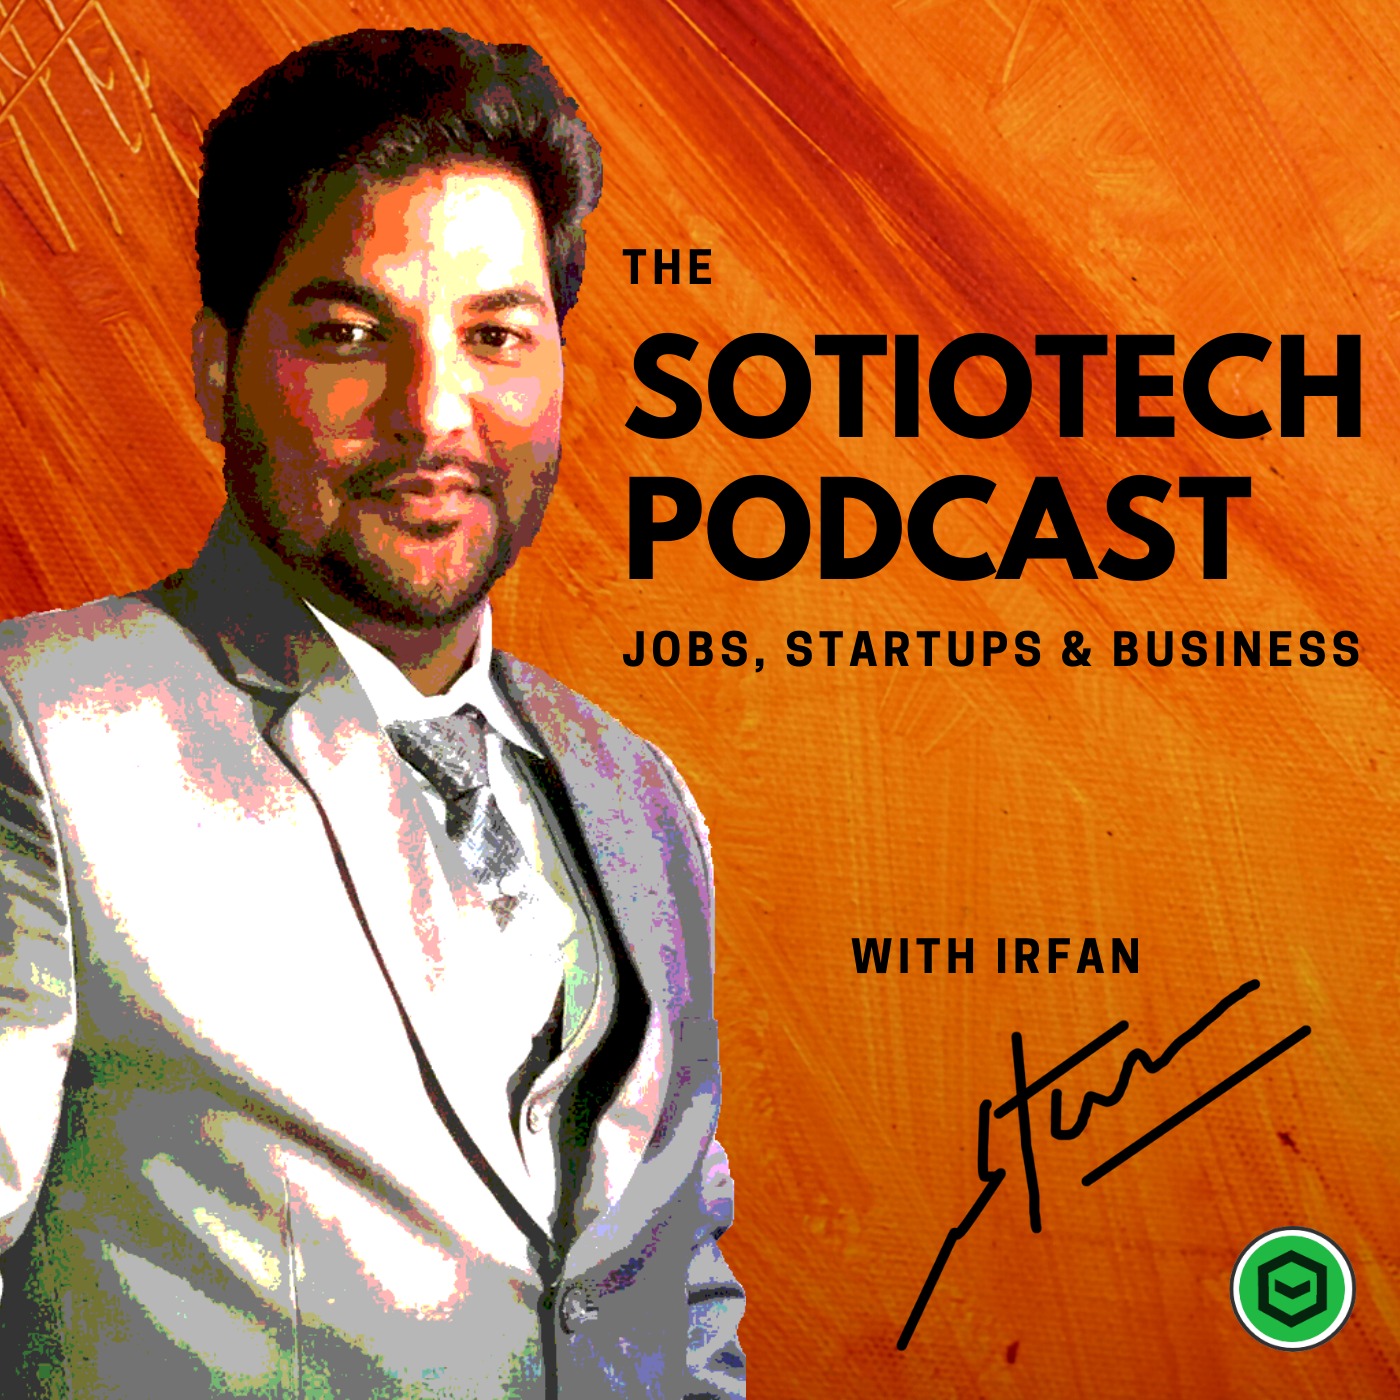 The Sotiotech Podcast